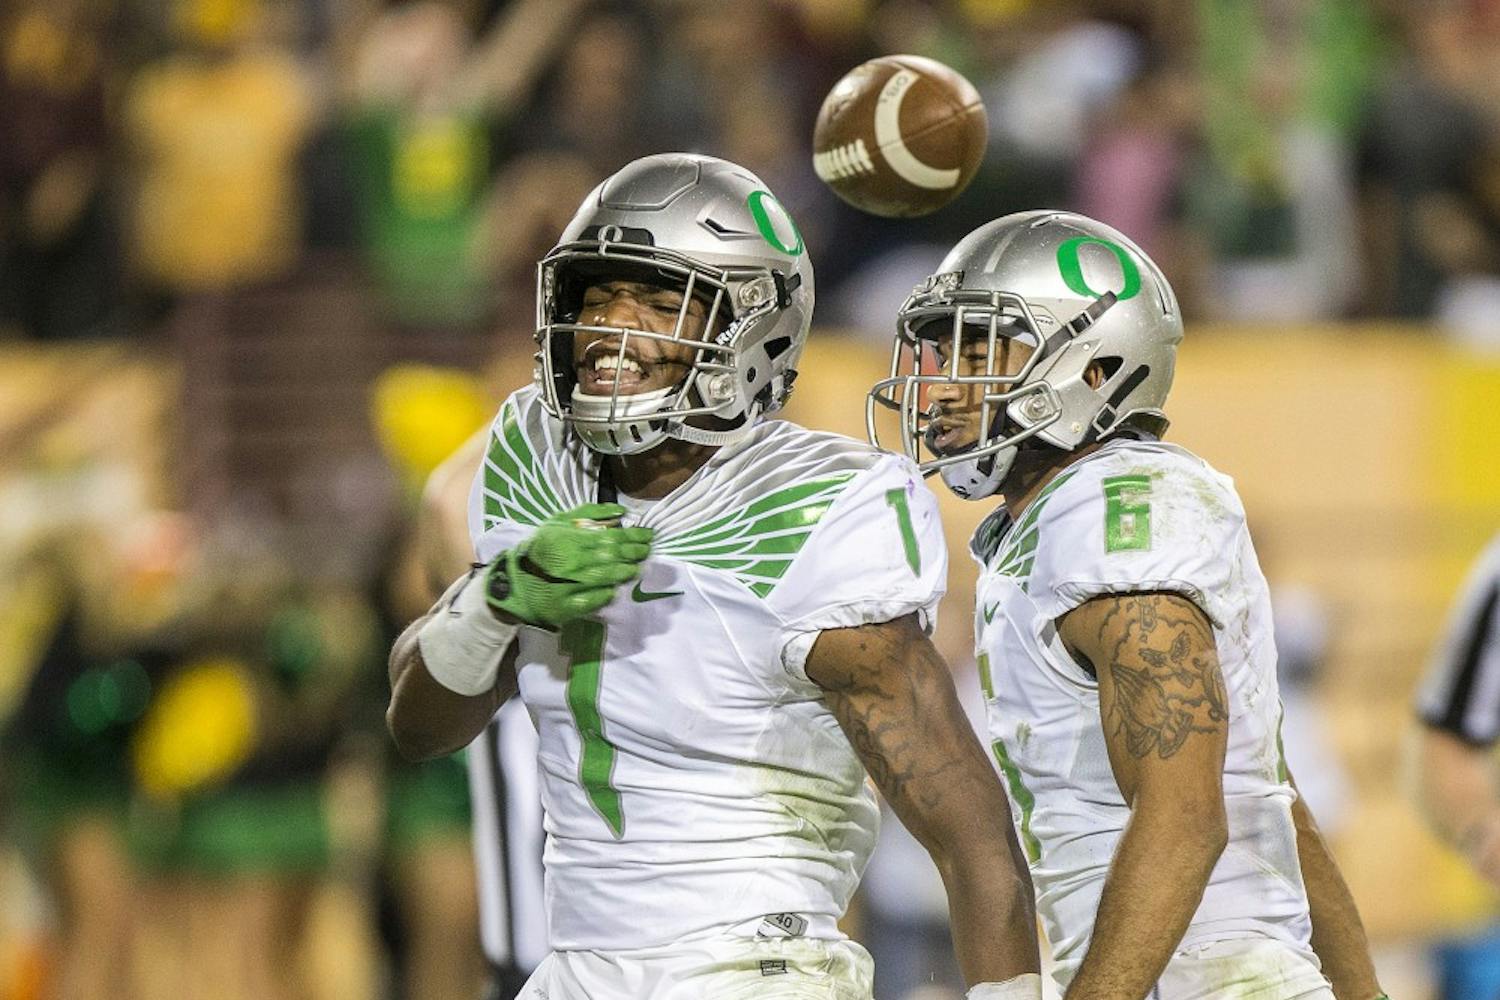 Oregon corner back Arrion Springs, left, celebrates with safety Charles Nelson, right, after pulling in an interception to end a game against ASU on Thursday, Oct. 29, 2015, at Sun Devil Stadium in Tempe, Ariz. The Ducks beat the Sun Devils 61-55 in the third overtime period. 